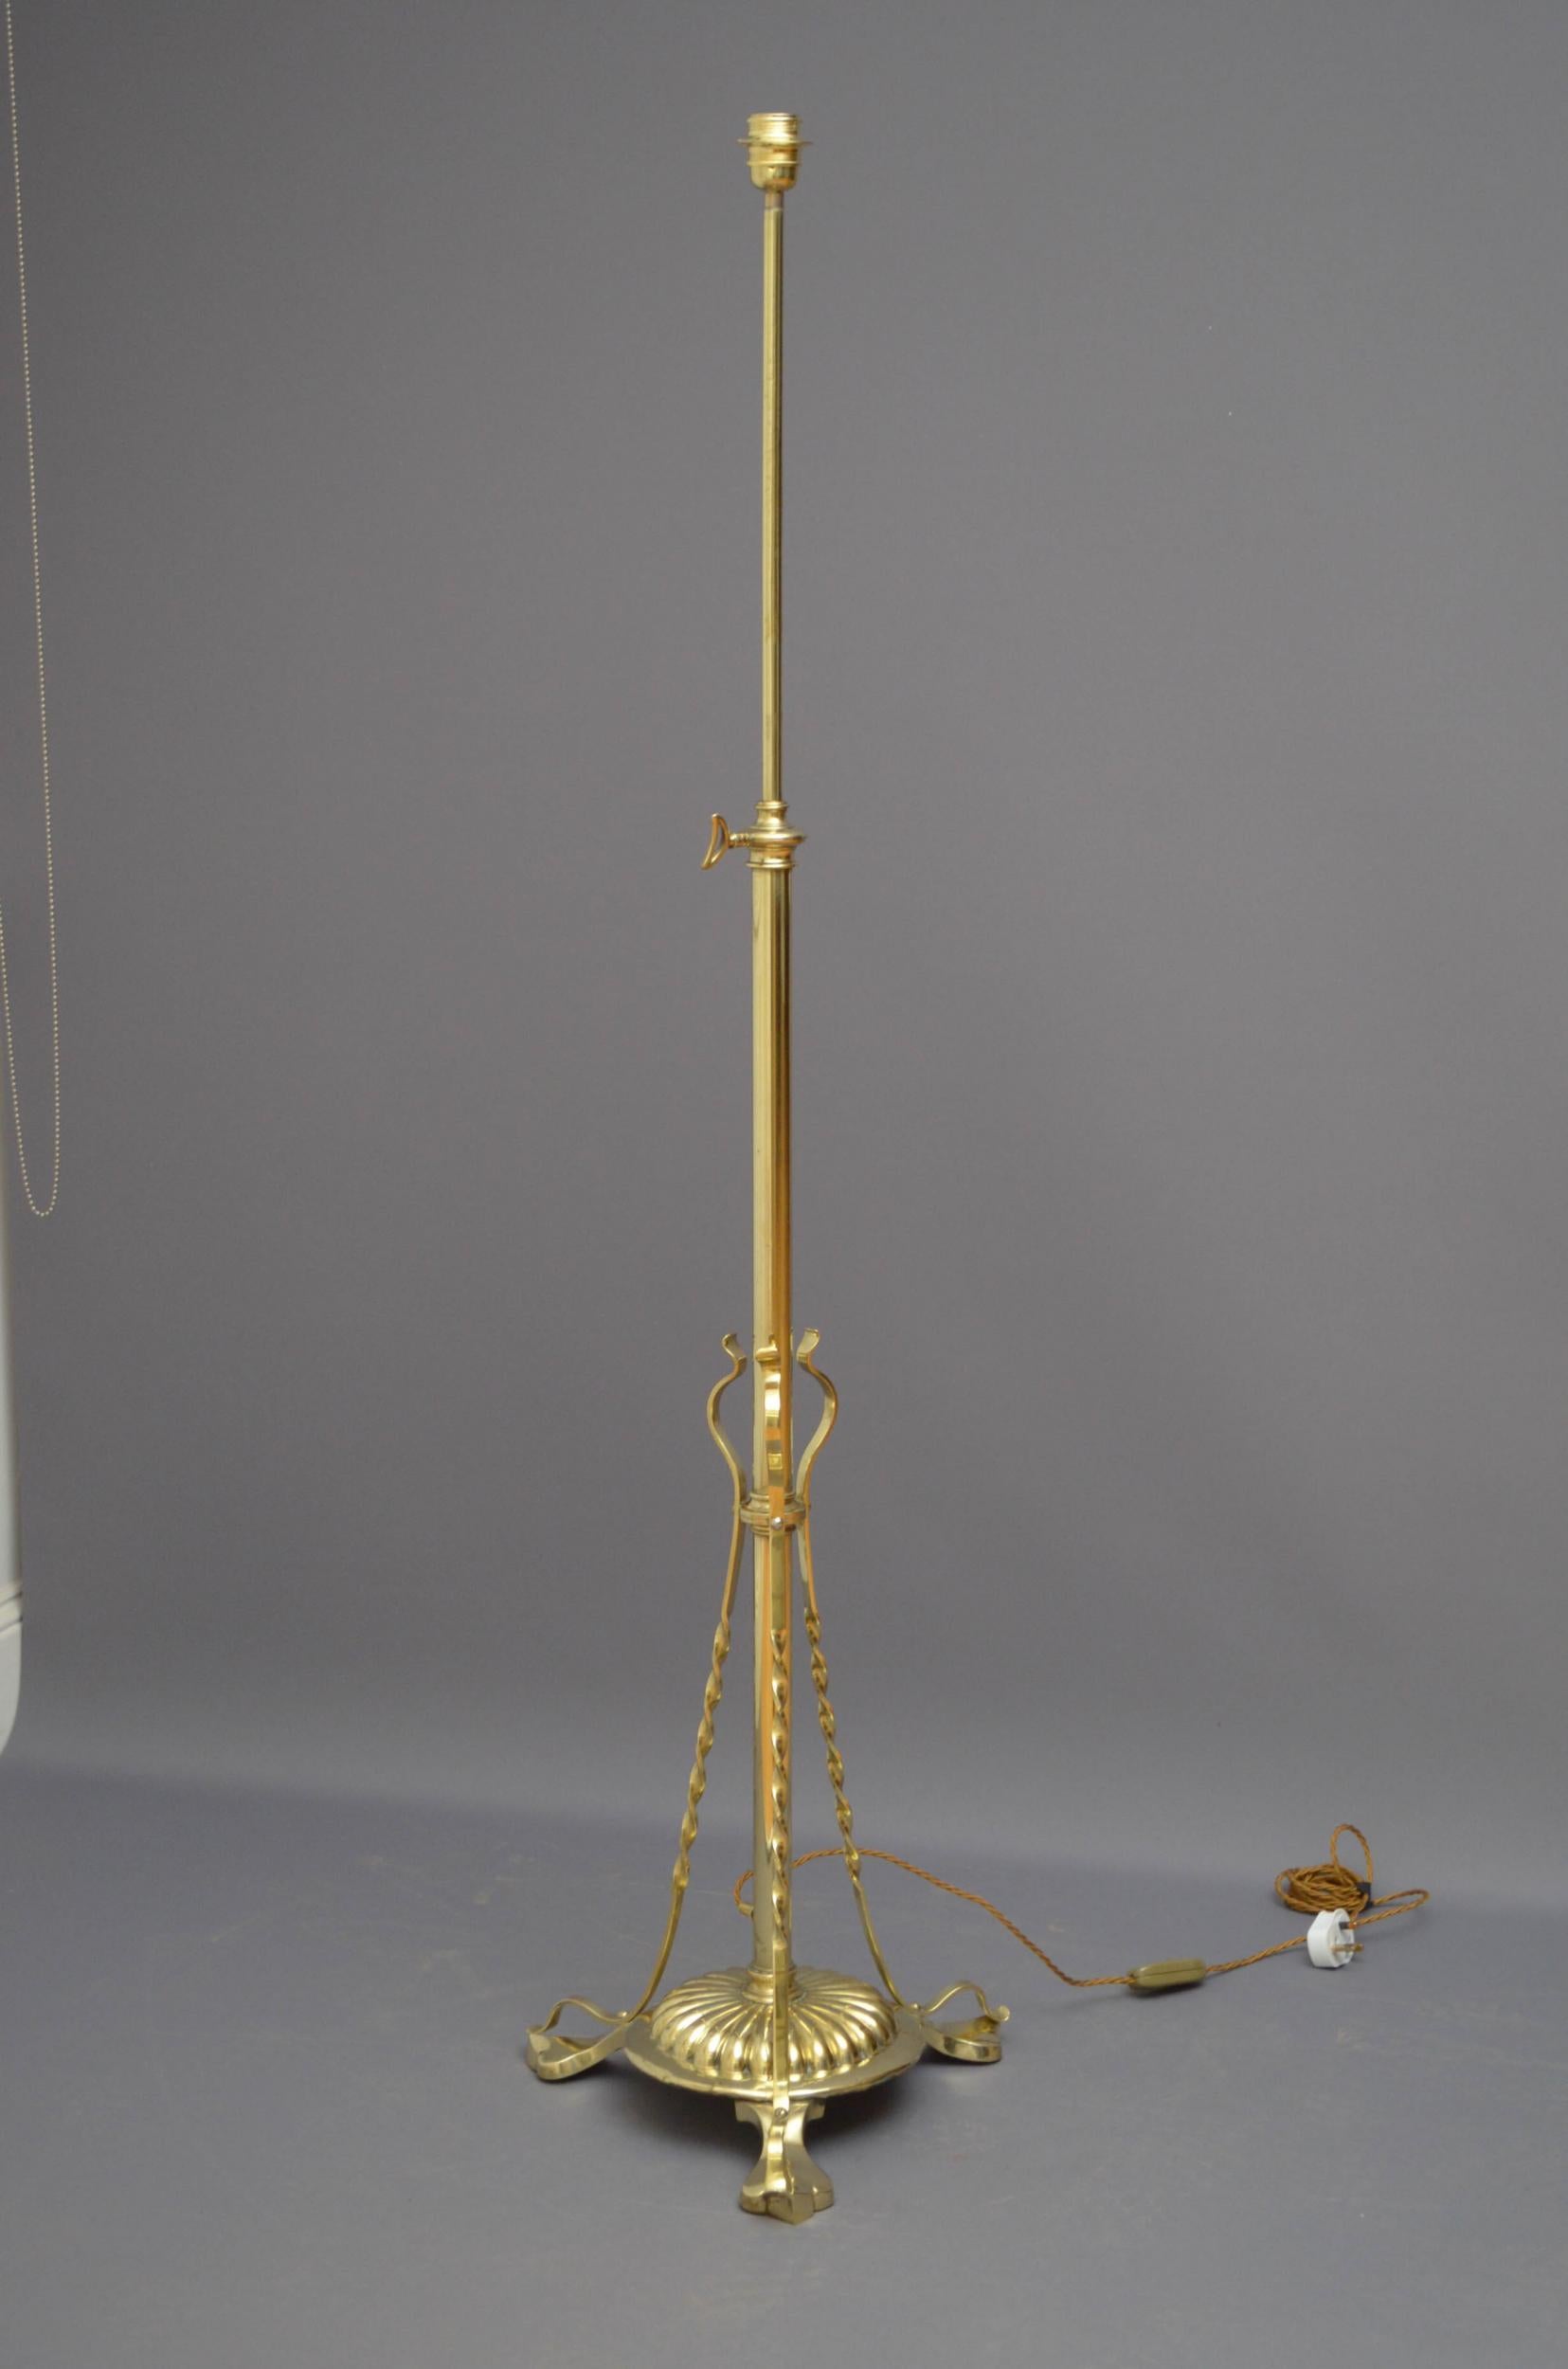 Sn4888 early 20th century brass standard lamp with height adjustable mechanism and circular fluted base with three twisted supports and pad feet. This antique lamp has been cleaned, polished and professionally rewired, all in home ready condition.